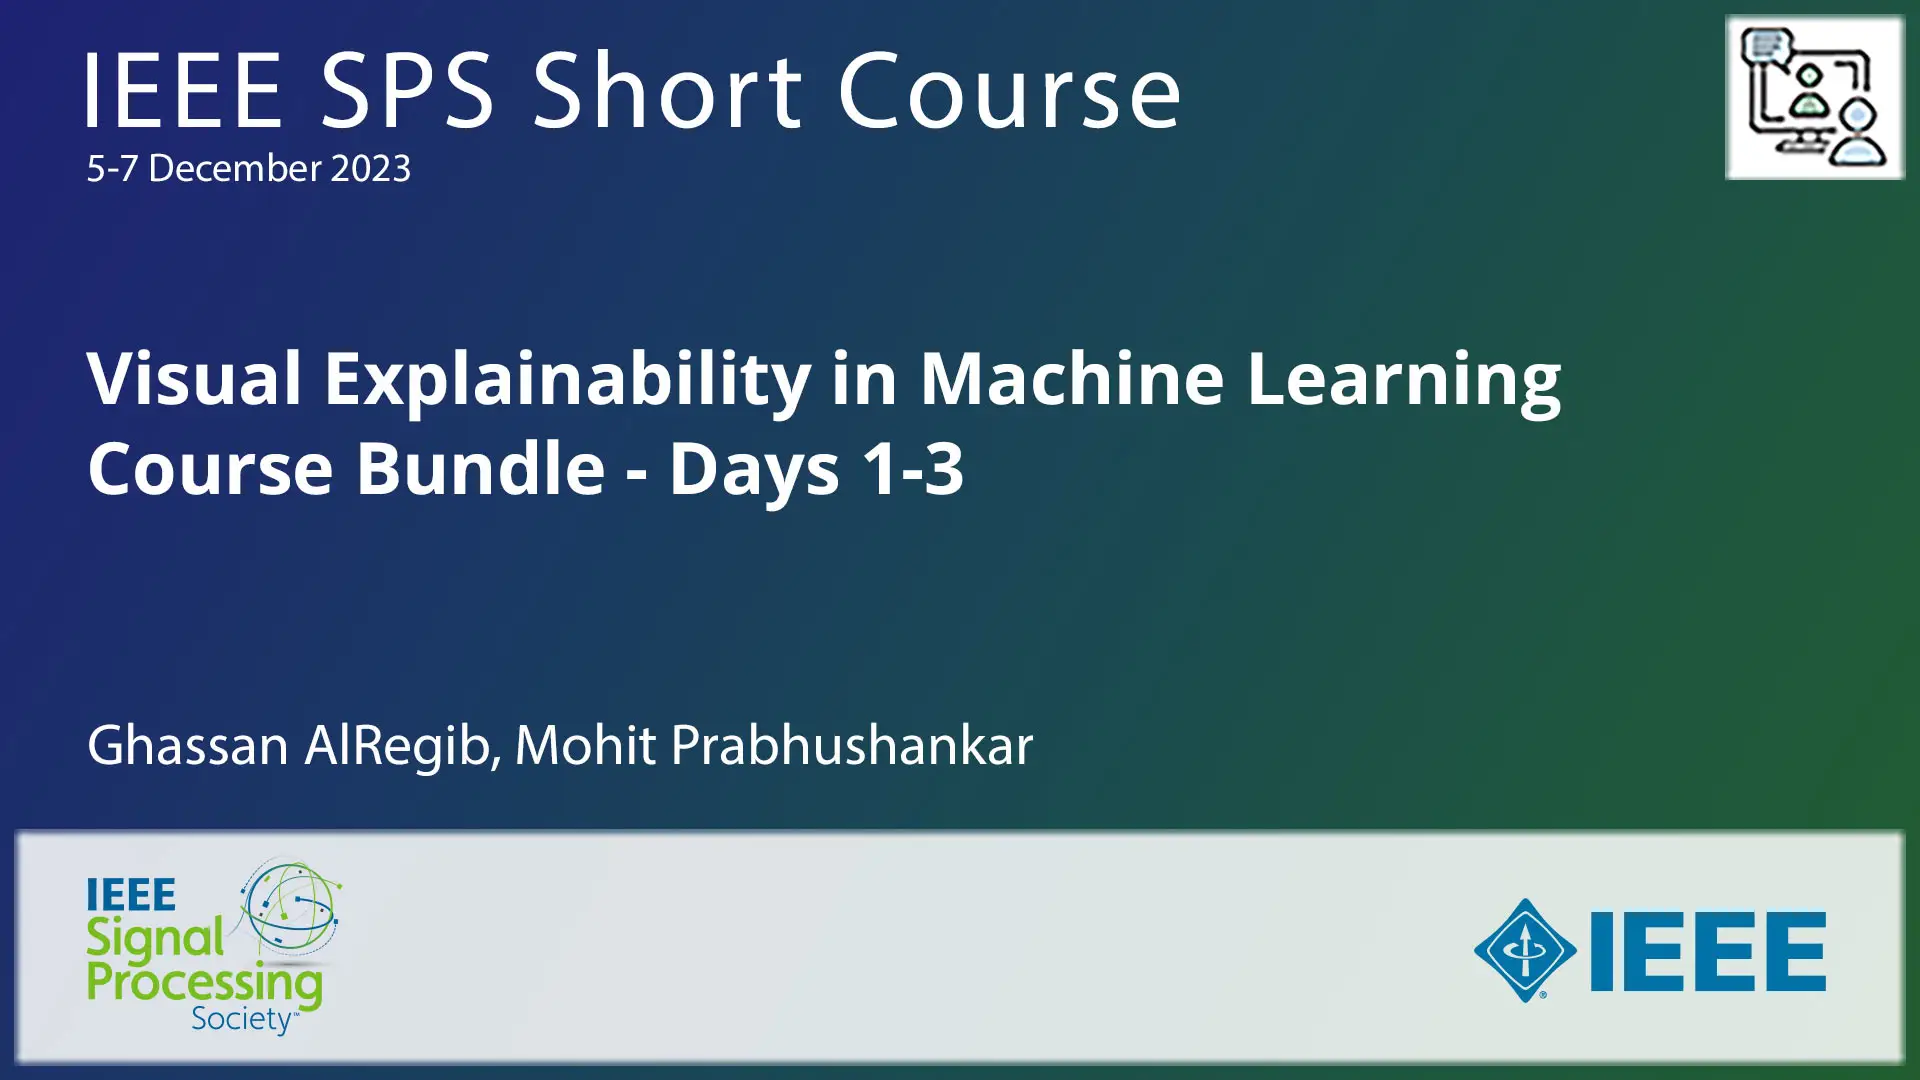 Short Course Bundle: Visual Explainability in Machine Learning - Days 1-3, December 2023